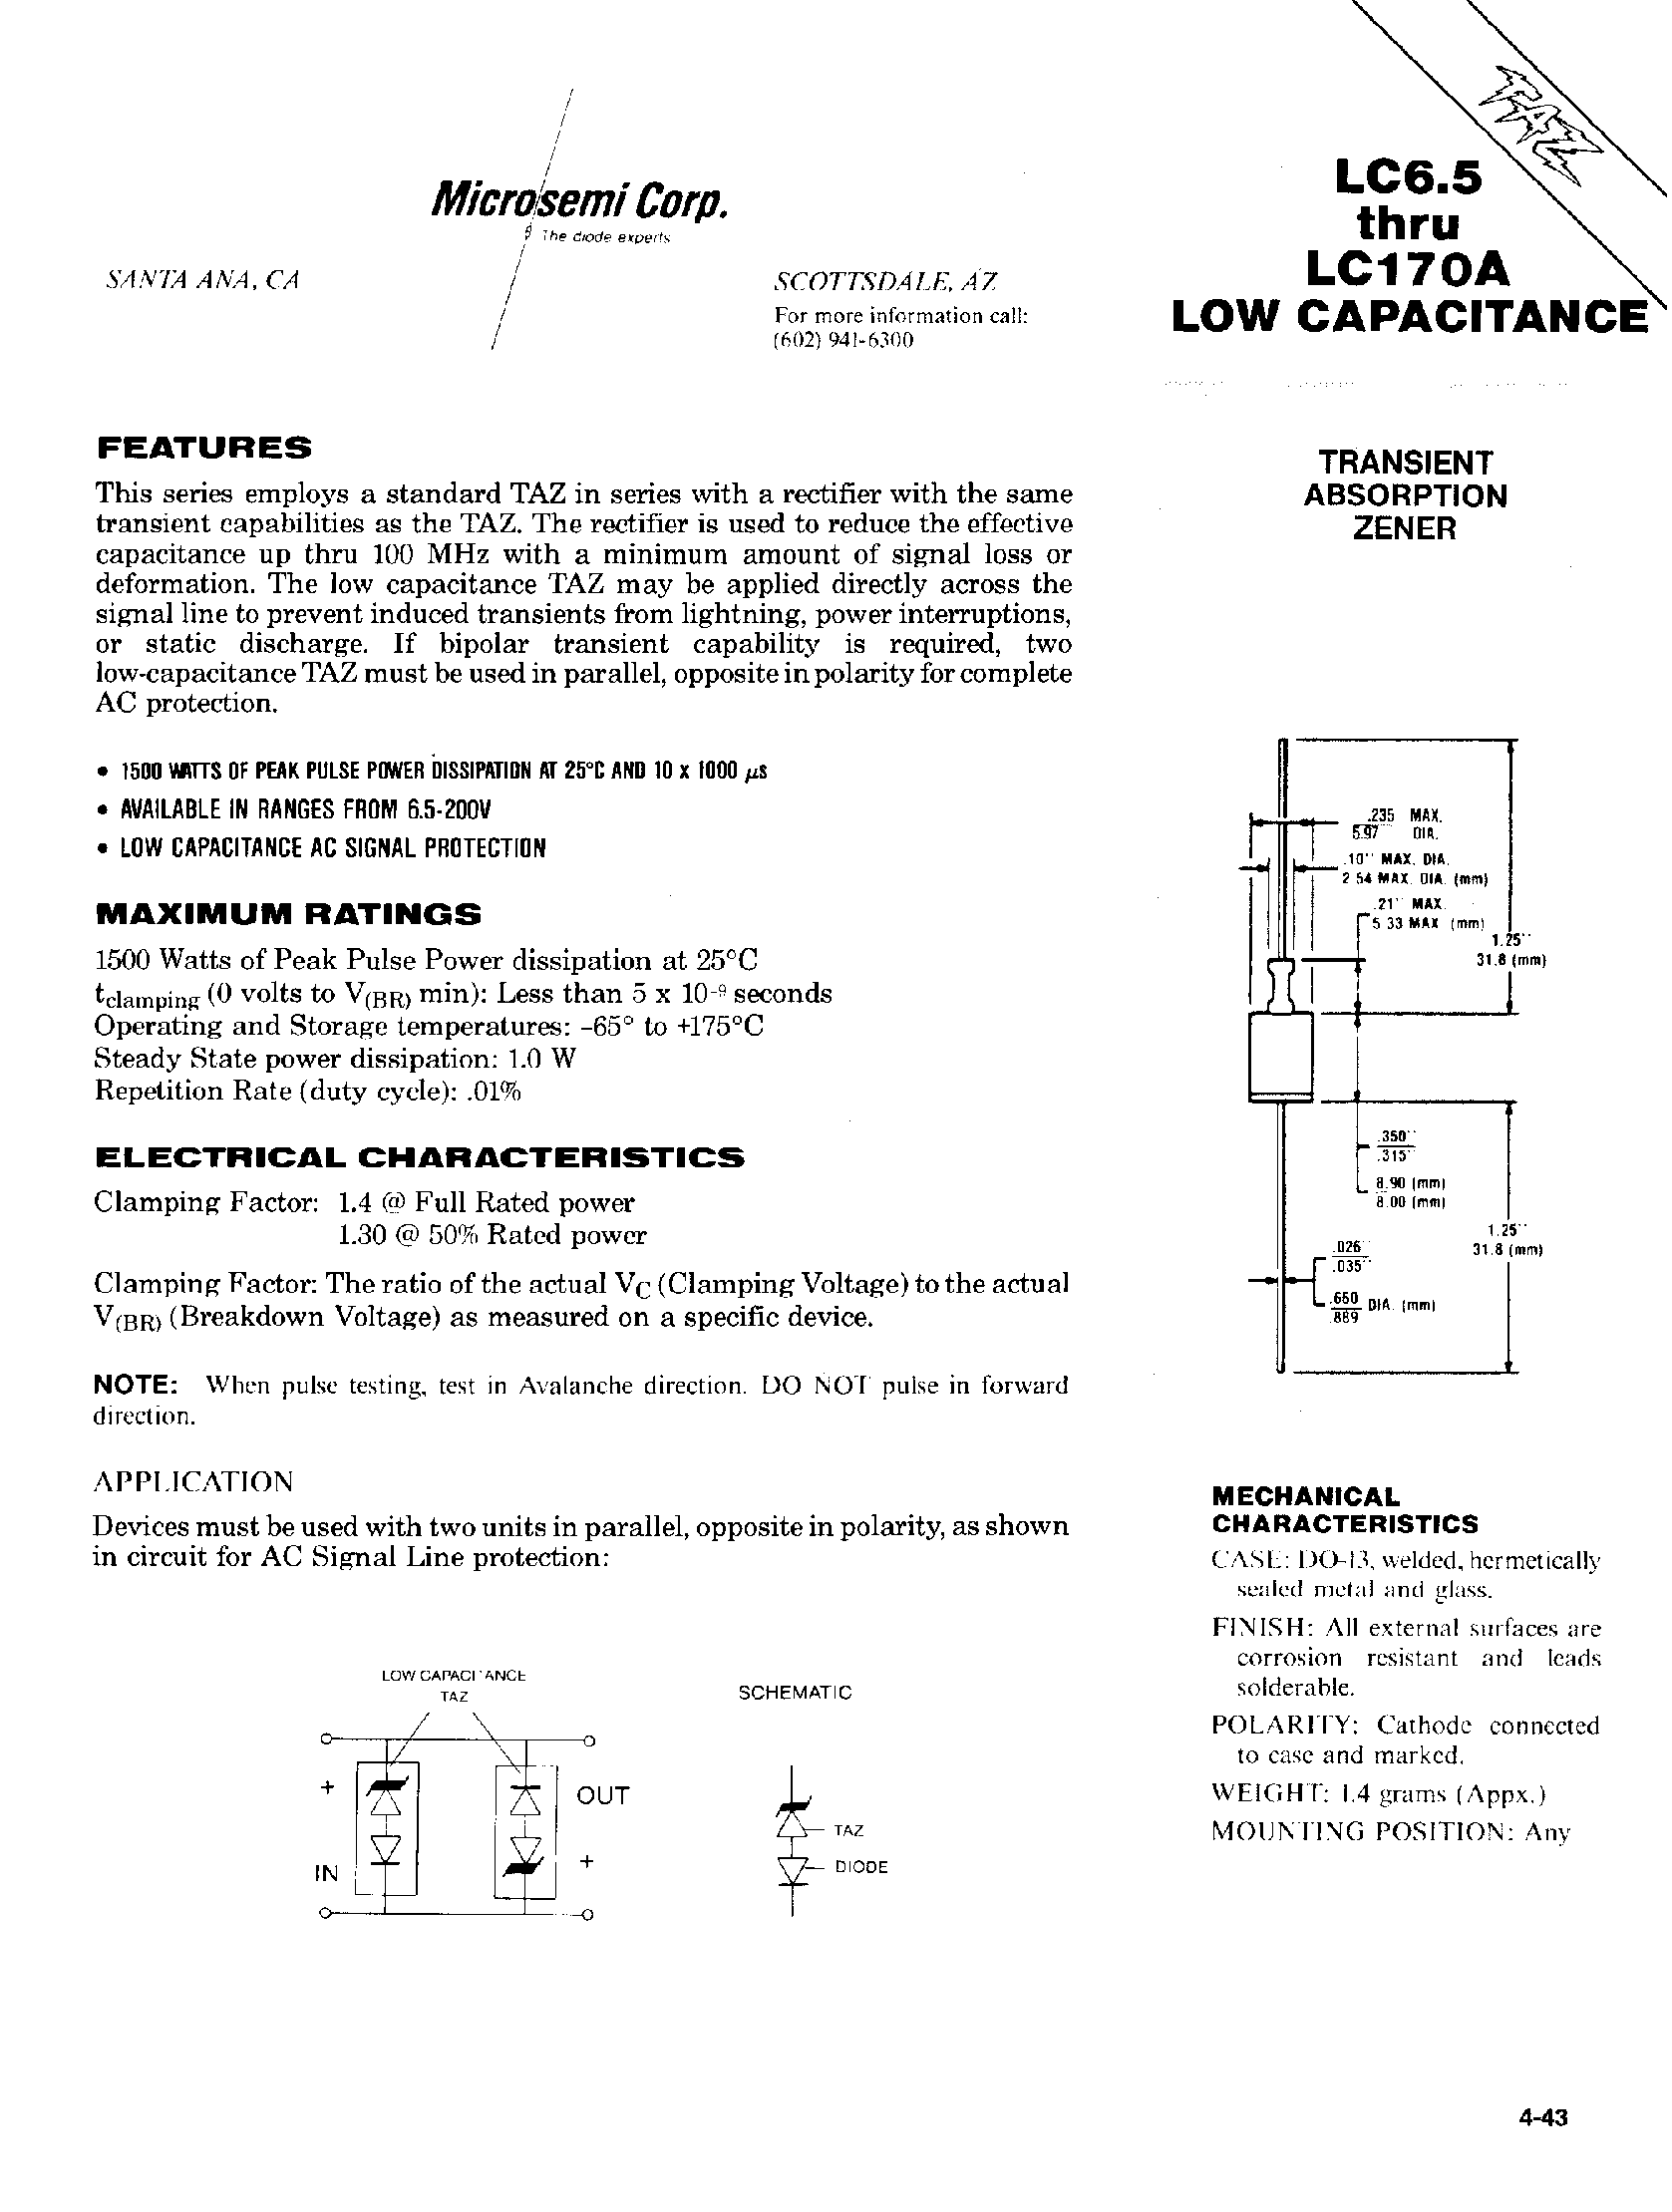 Даташит LC130A - TRANSIENT ABSORPTION ZENER страница 1